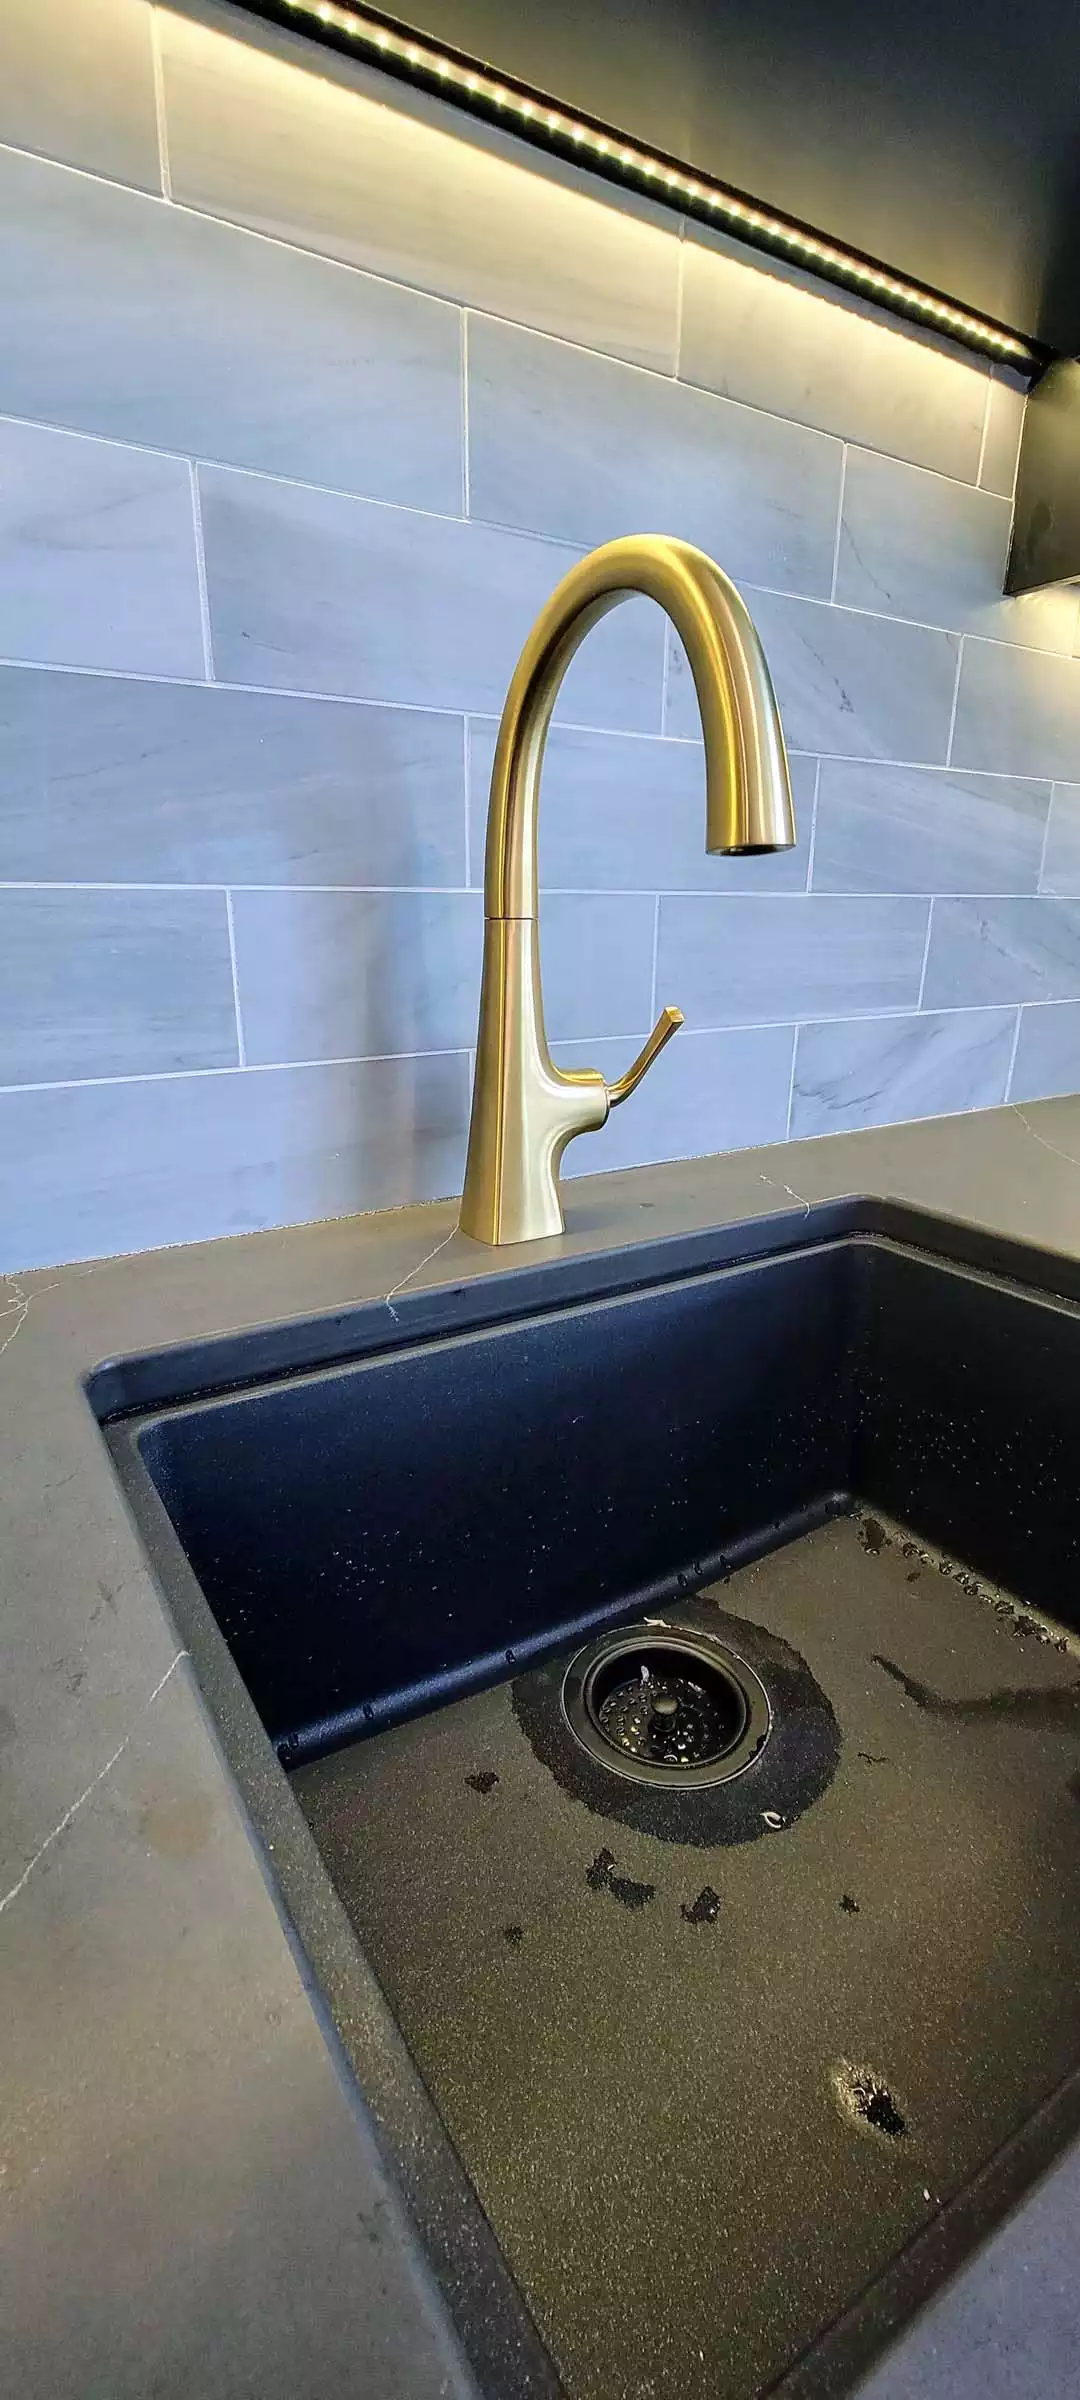 Stylish black undermount sink with gold tone faucet